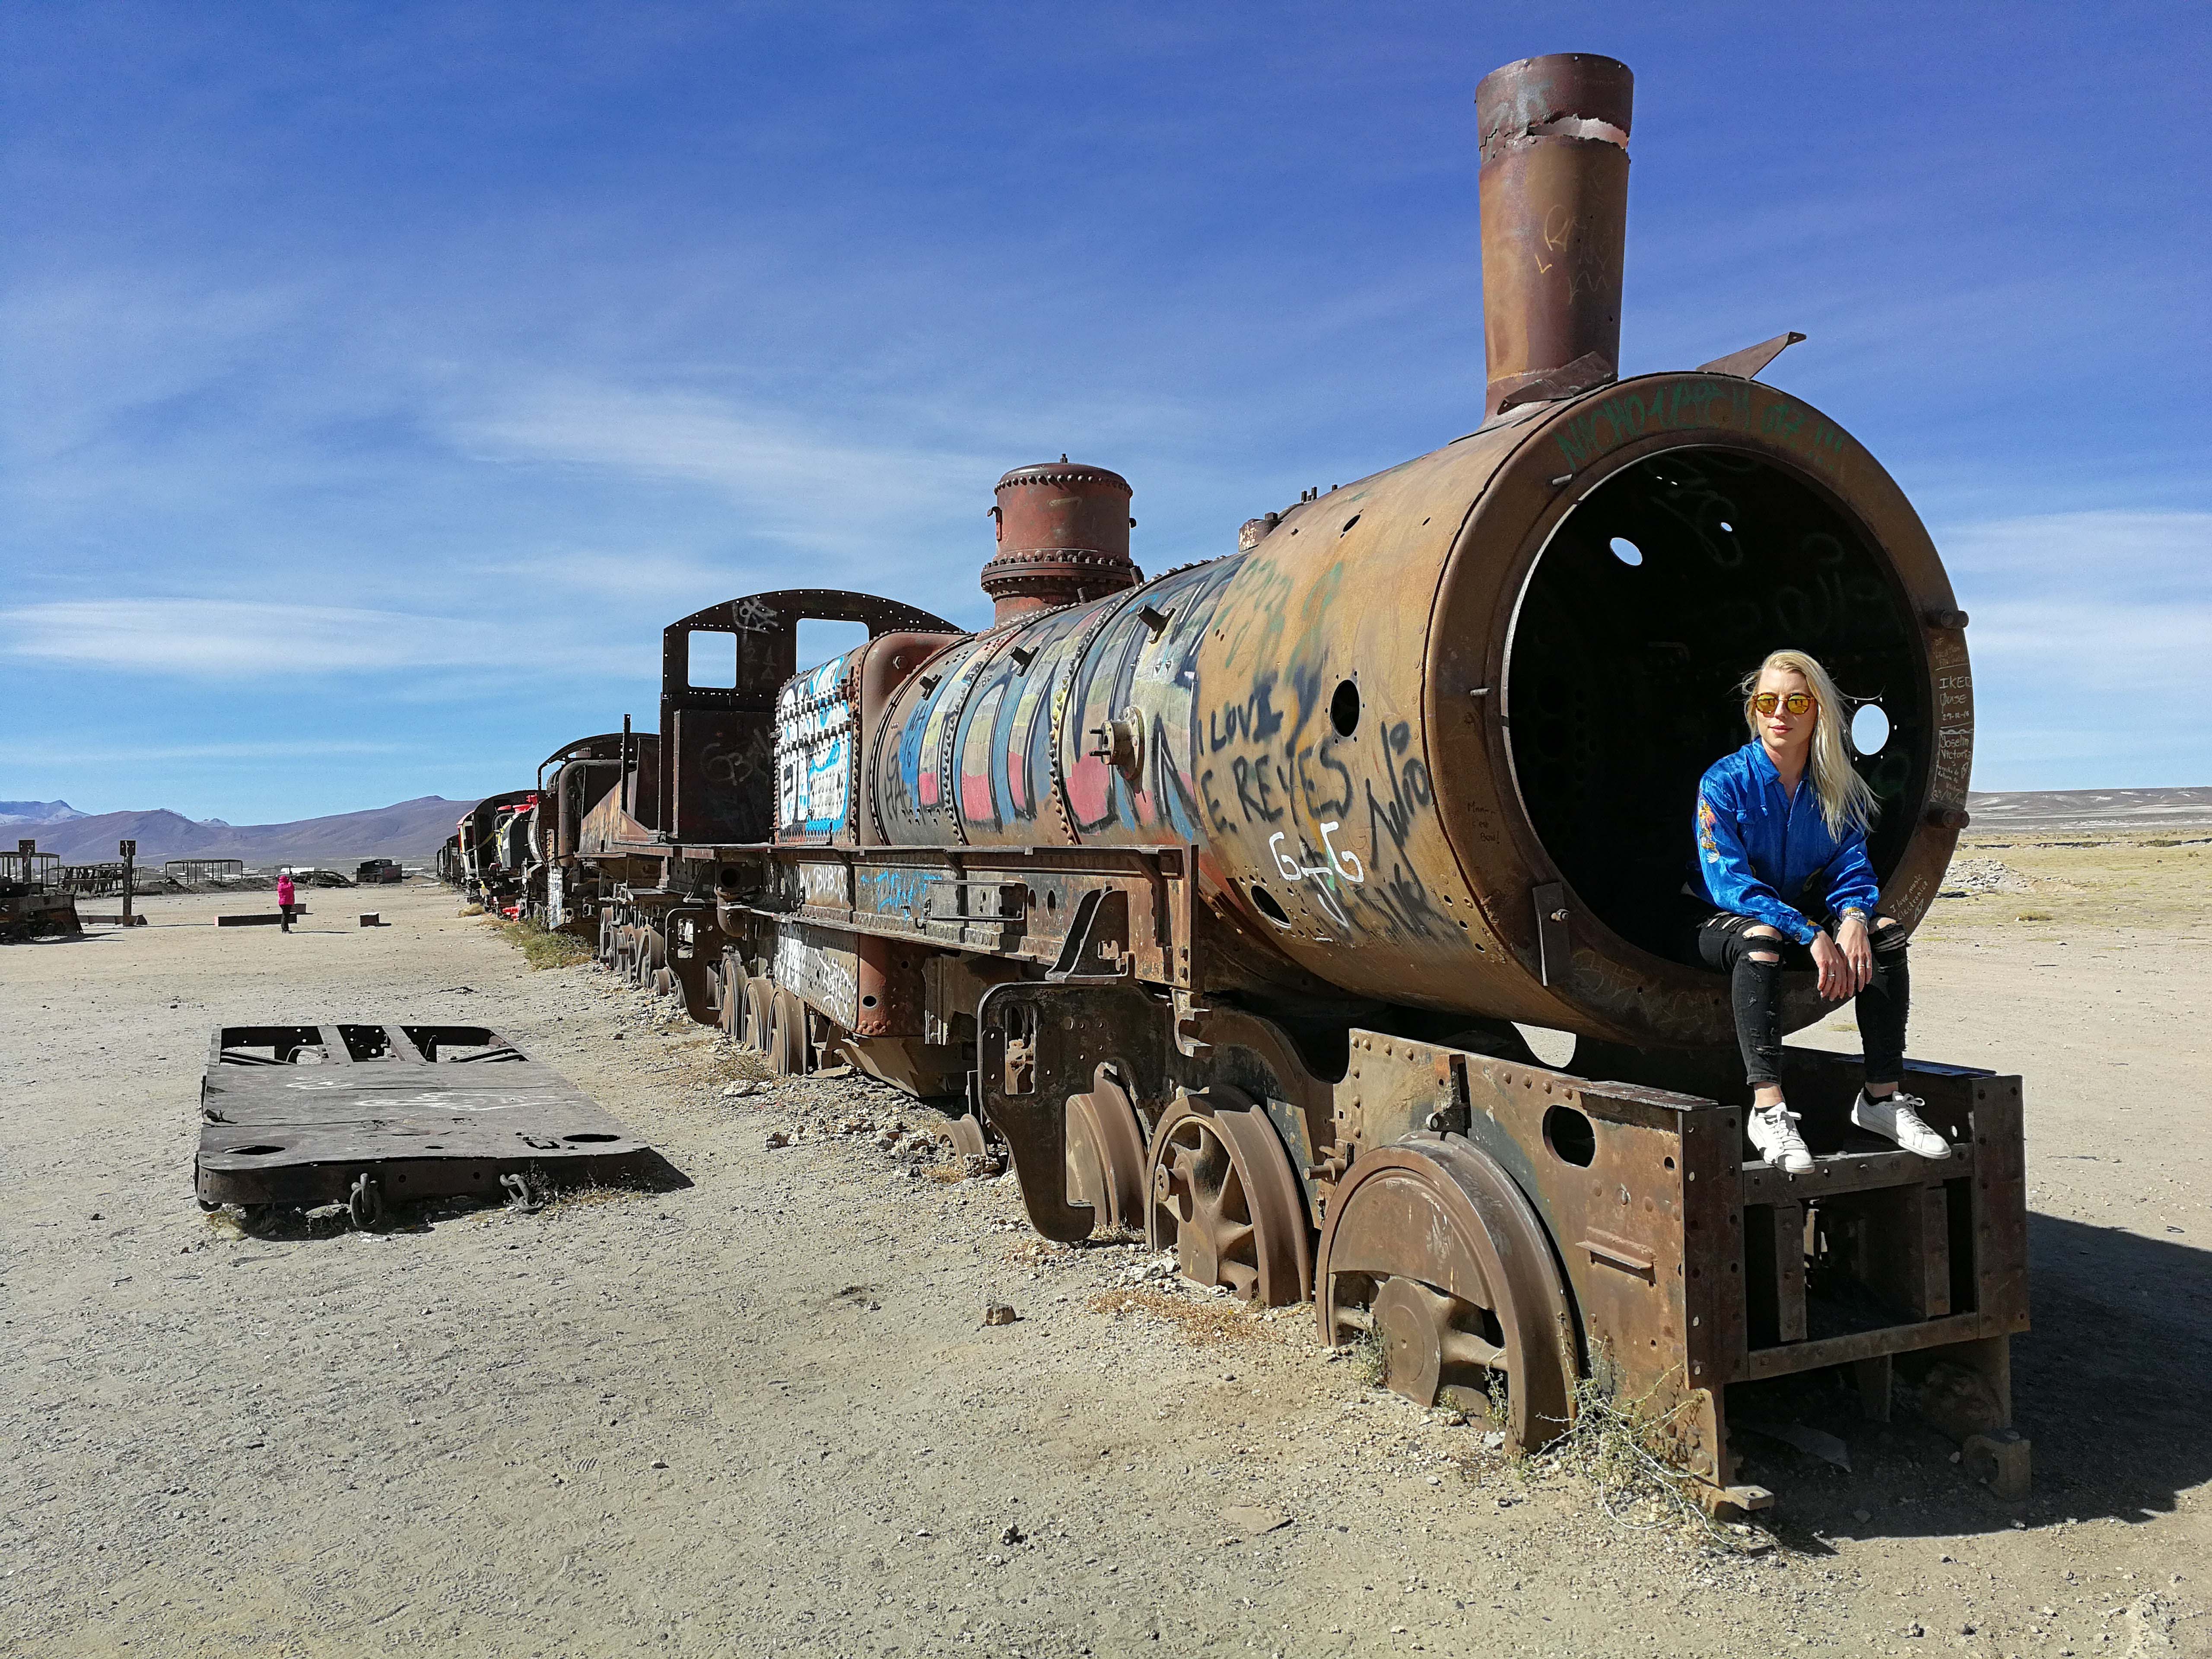 Louise sitting on the front of an abandoned train in the desert 